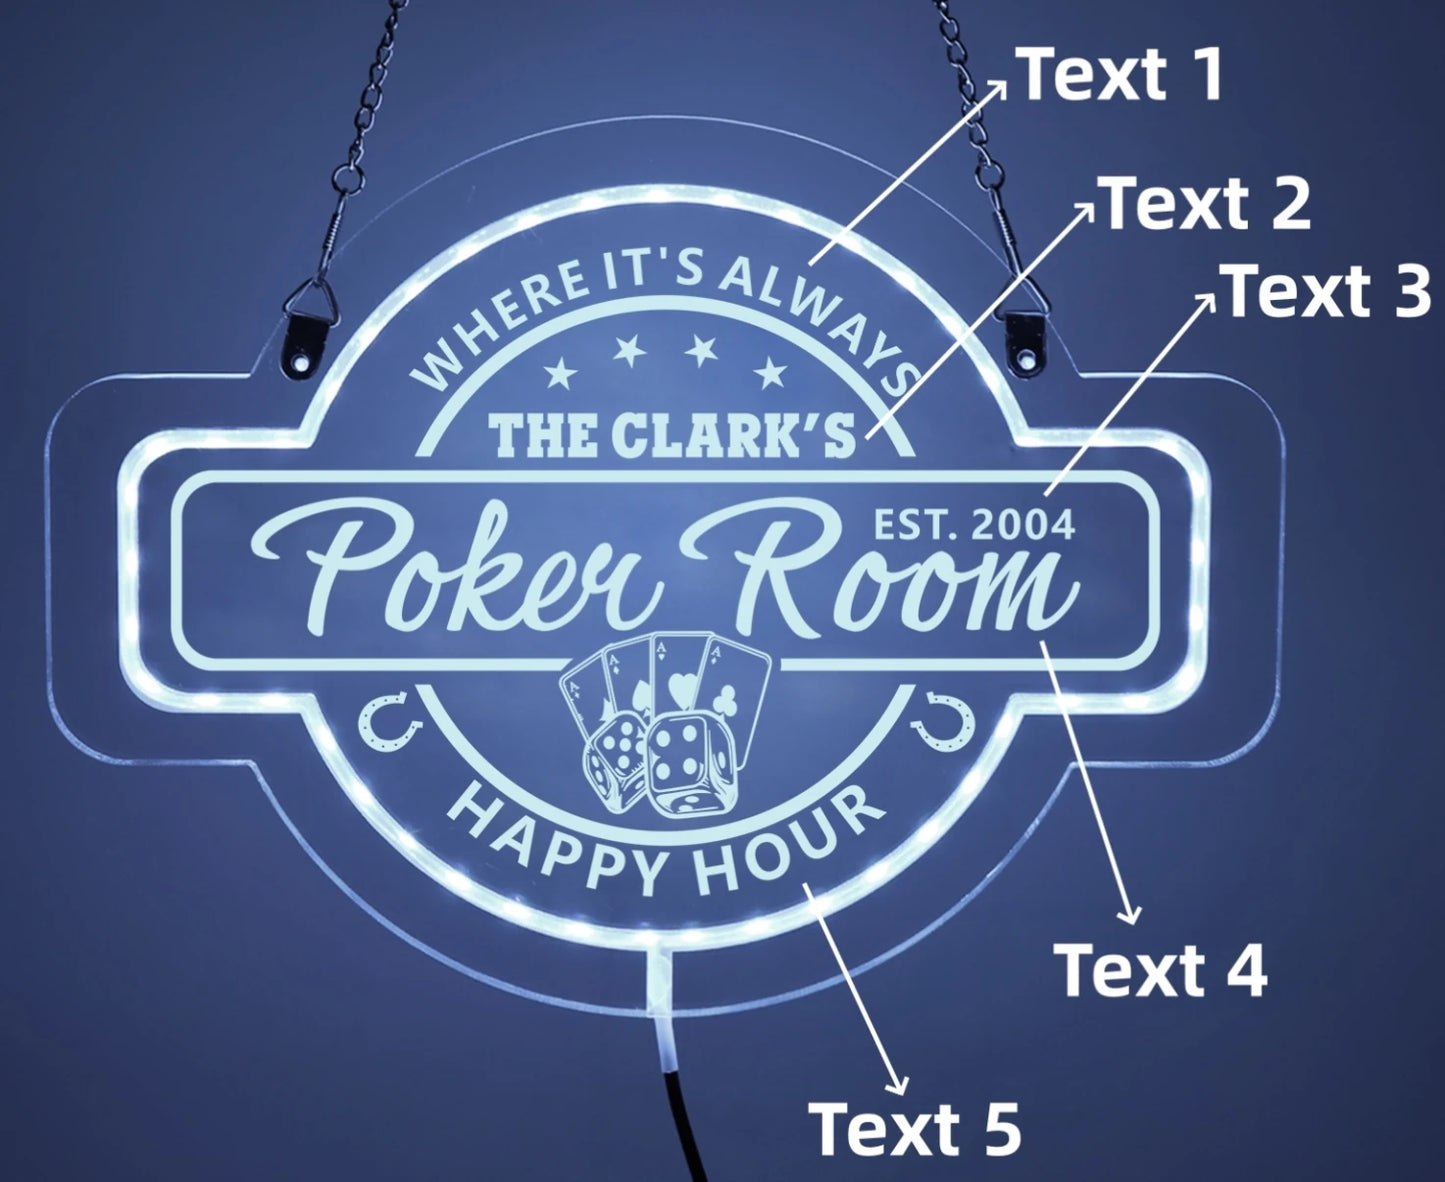 Personalized LED Color Changing Acrylic Poker Room Bar Sign